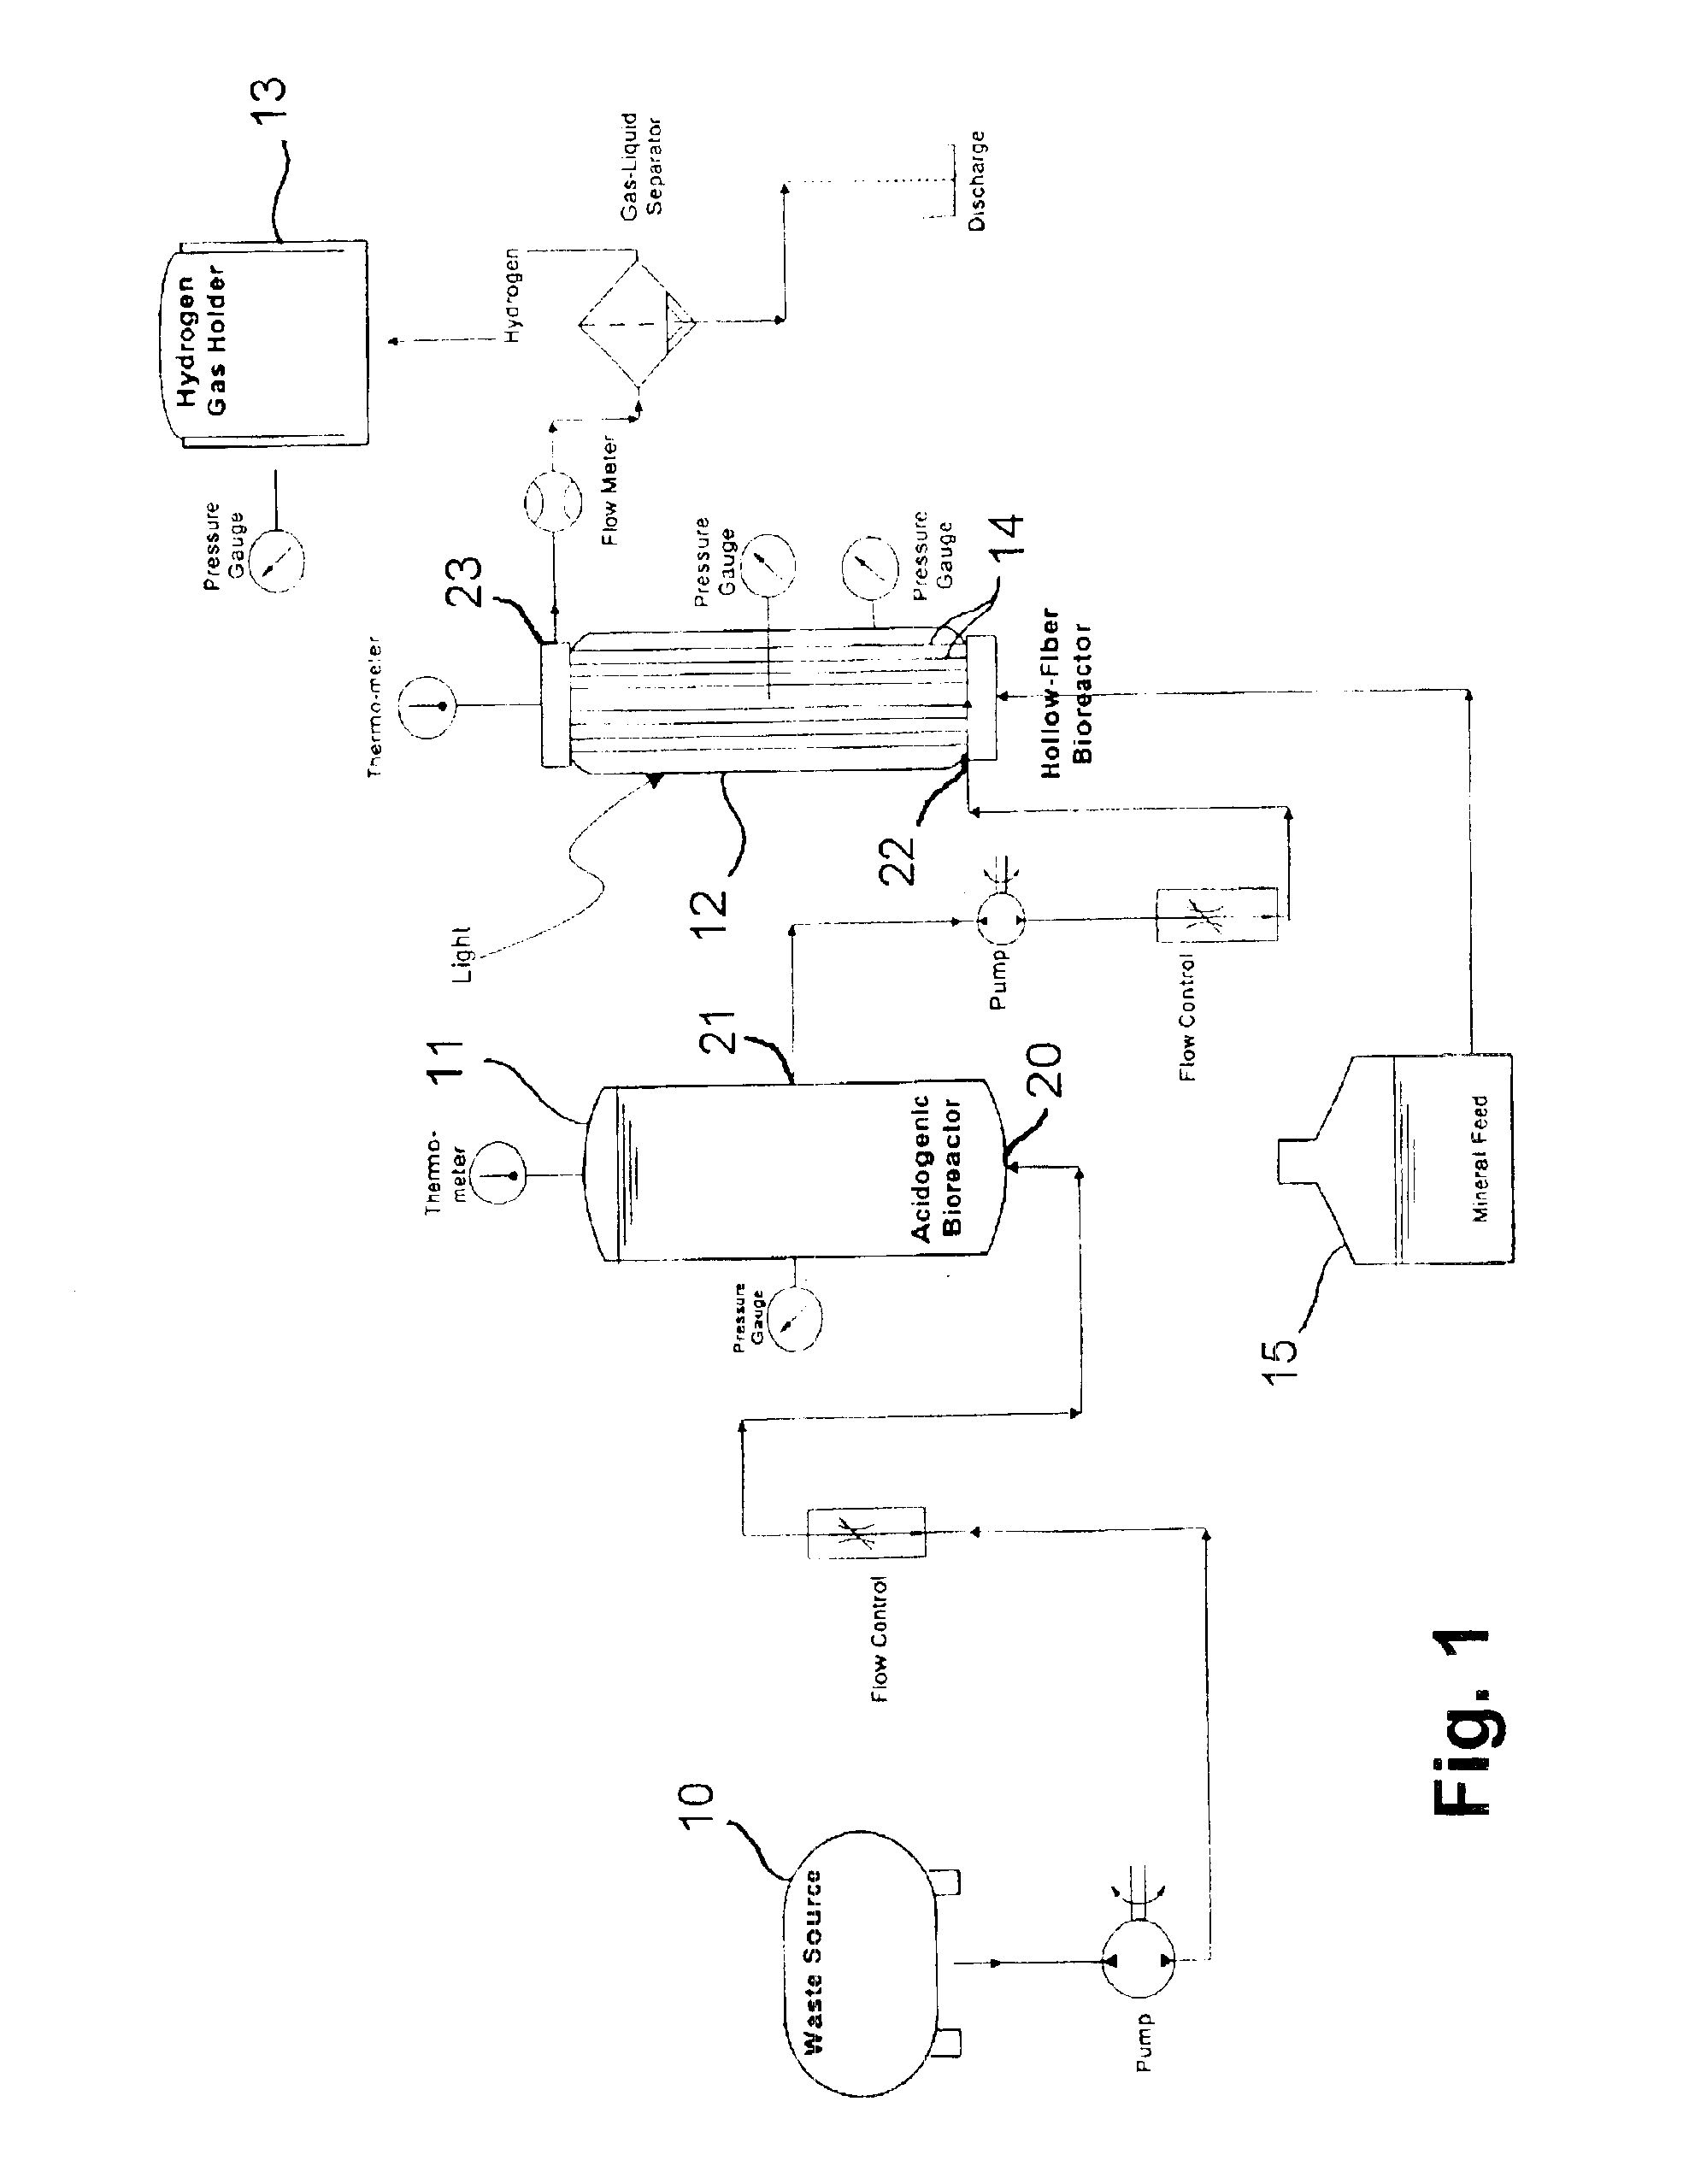 Method and apparatus for hydrogen production from organic wastes and manure